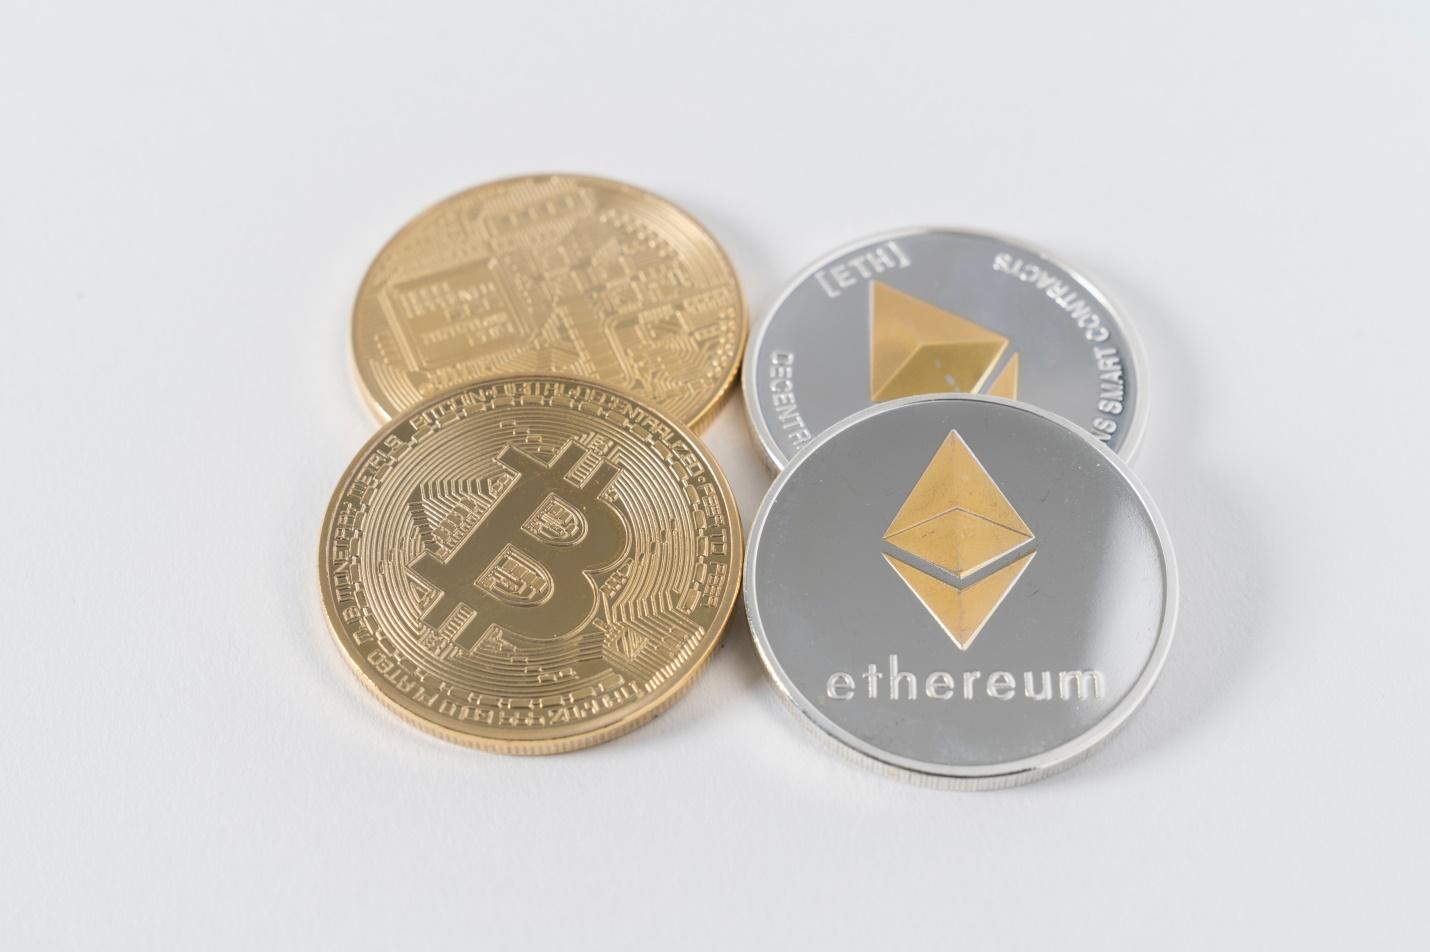 Two Bitcoins and two Ethereum digital coins can be seen in the image. 